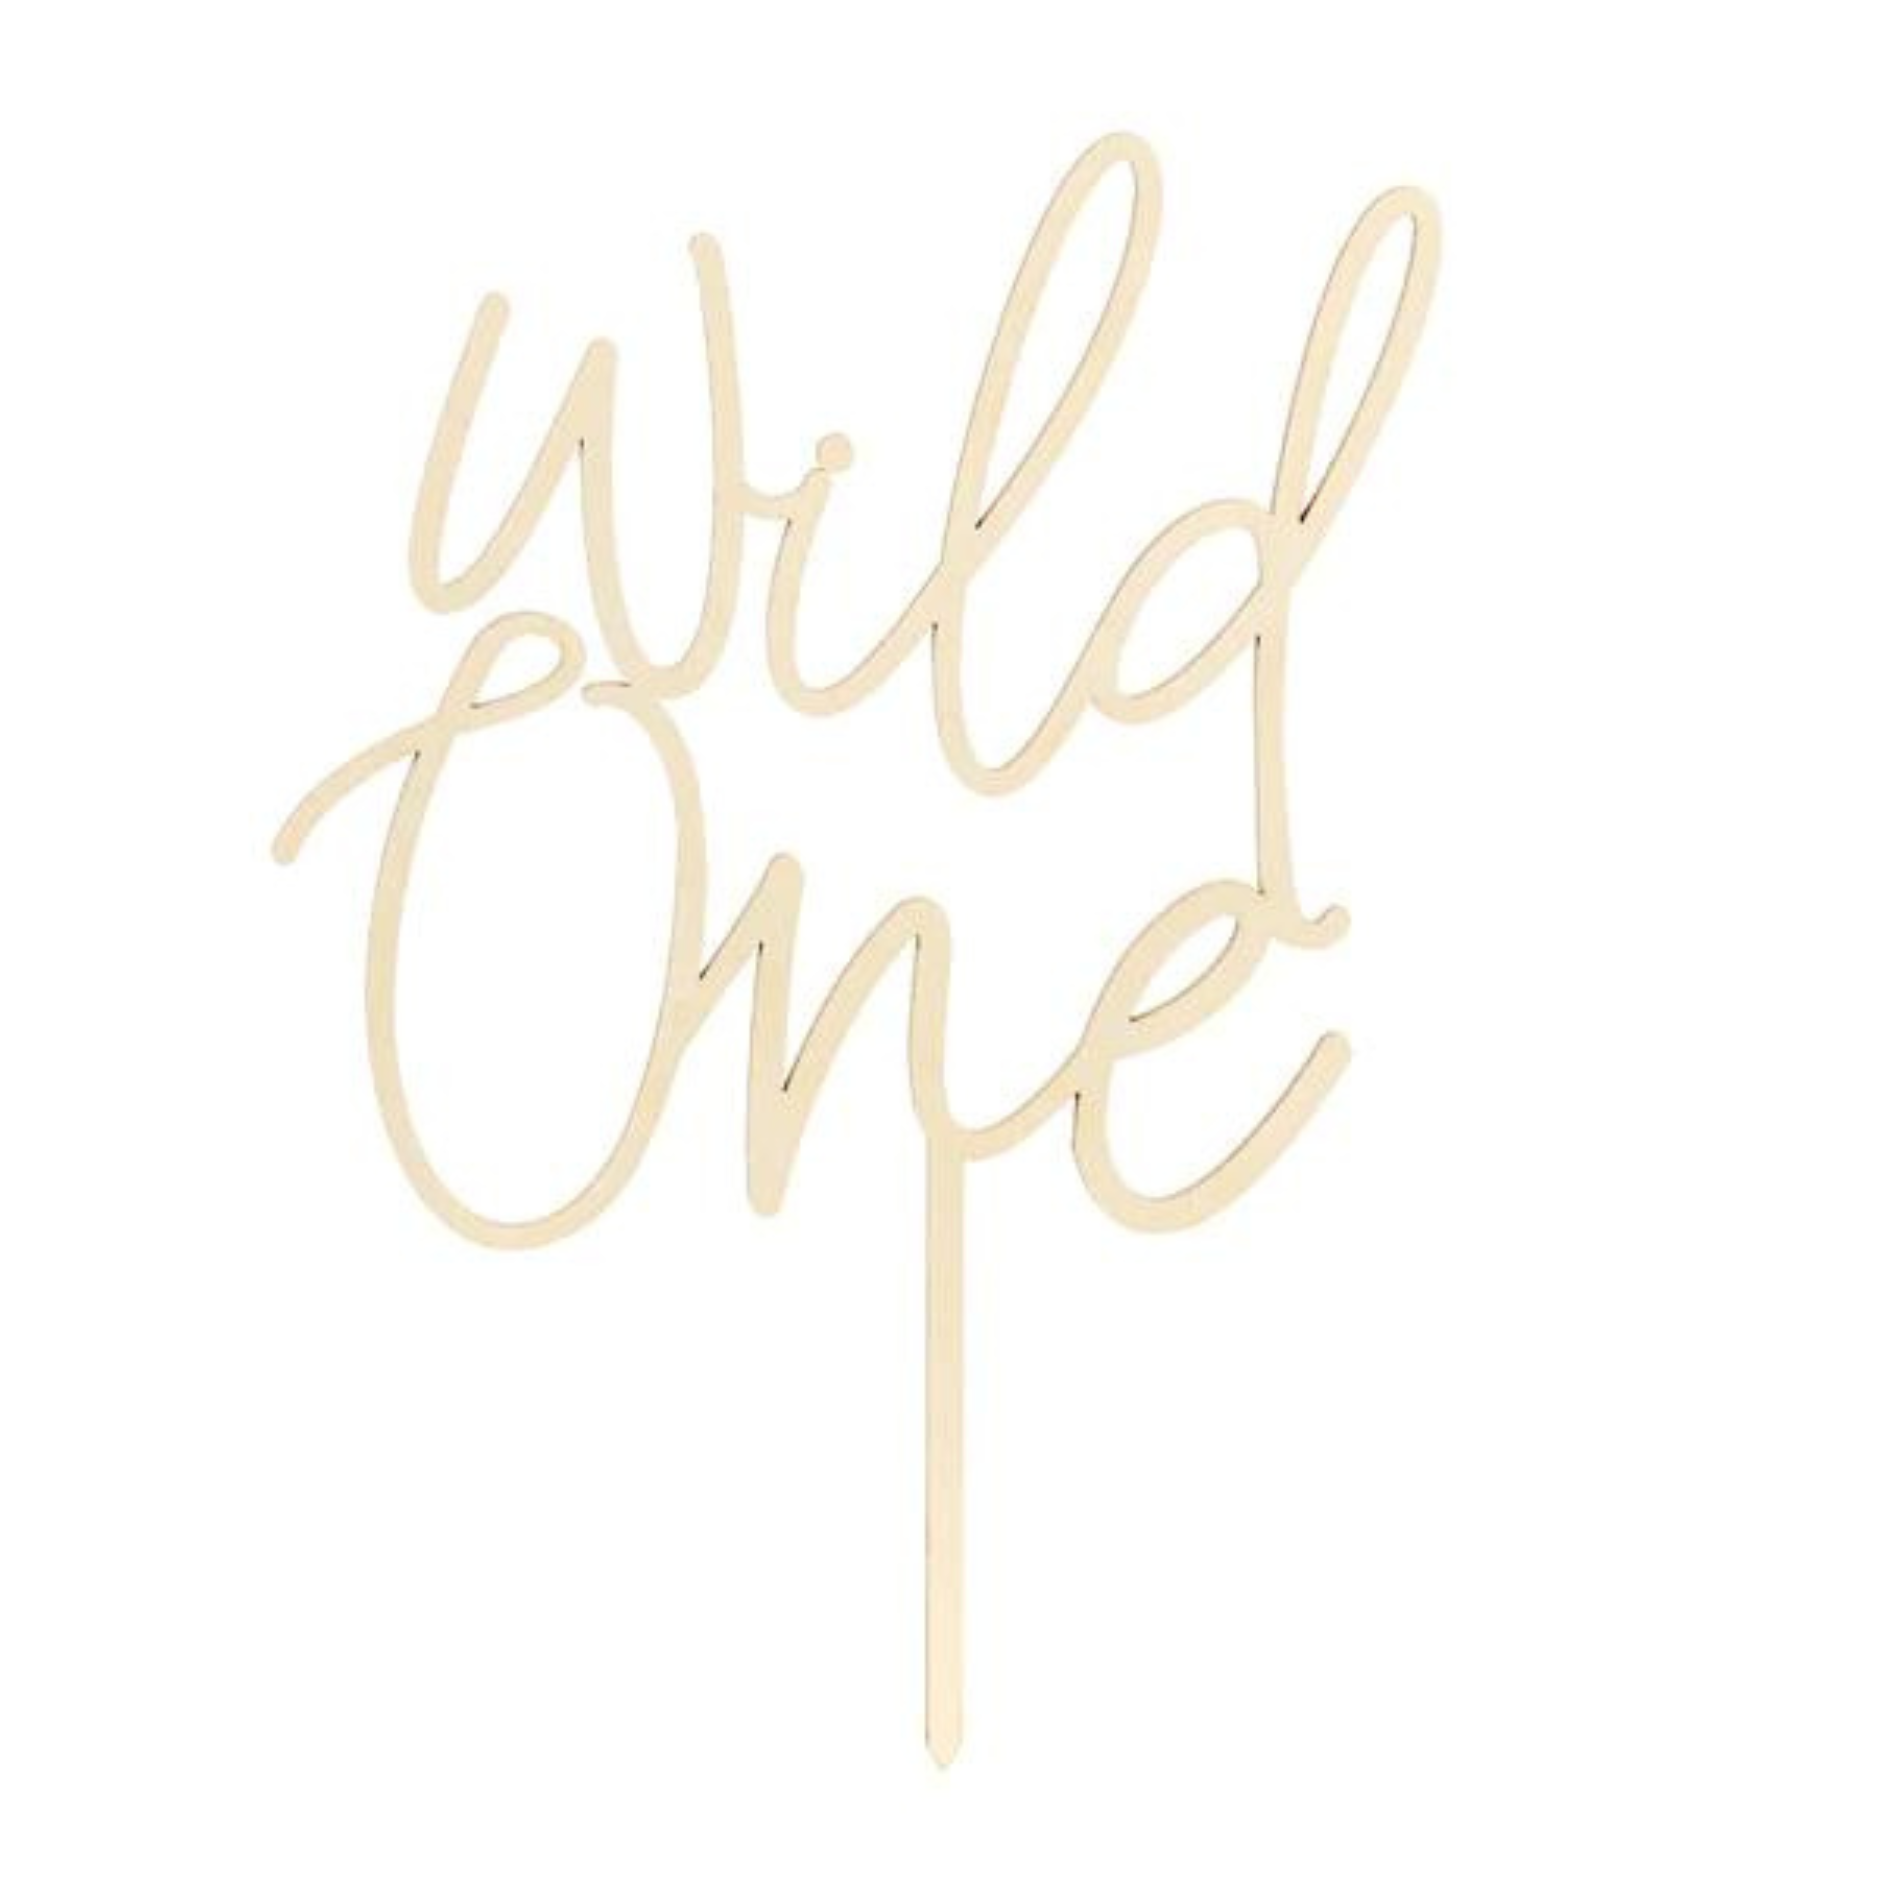 wooden cake topper "wild one"